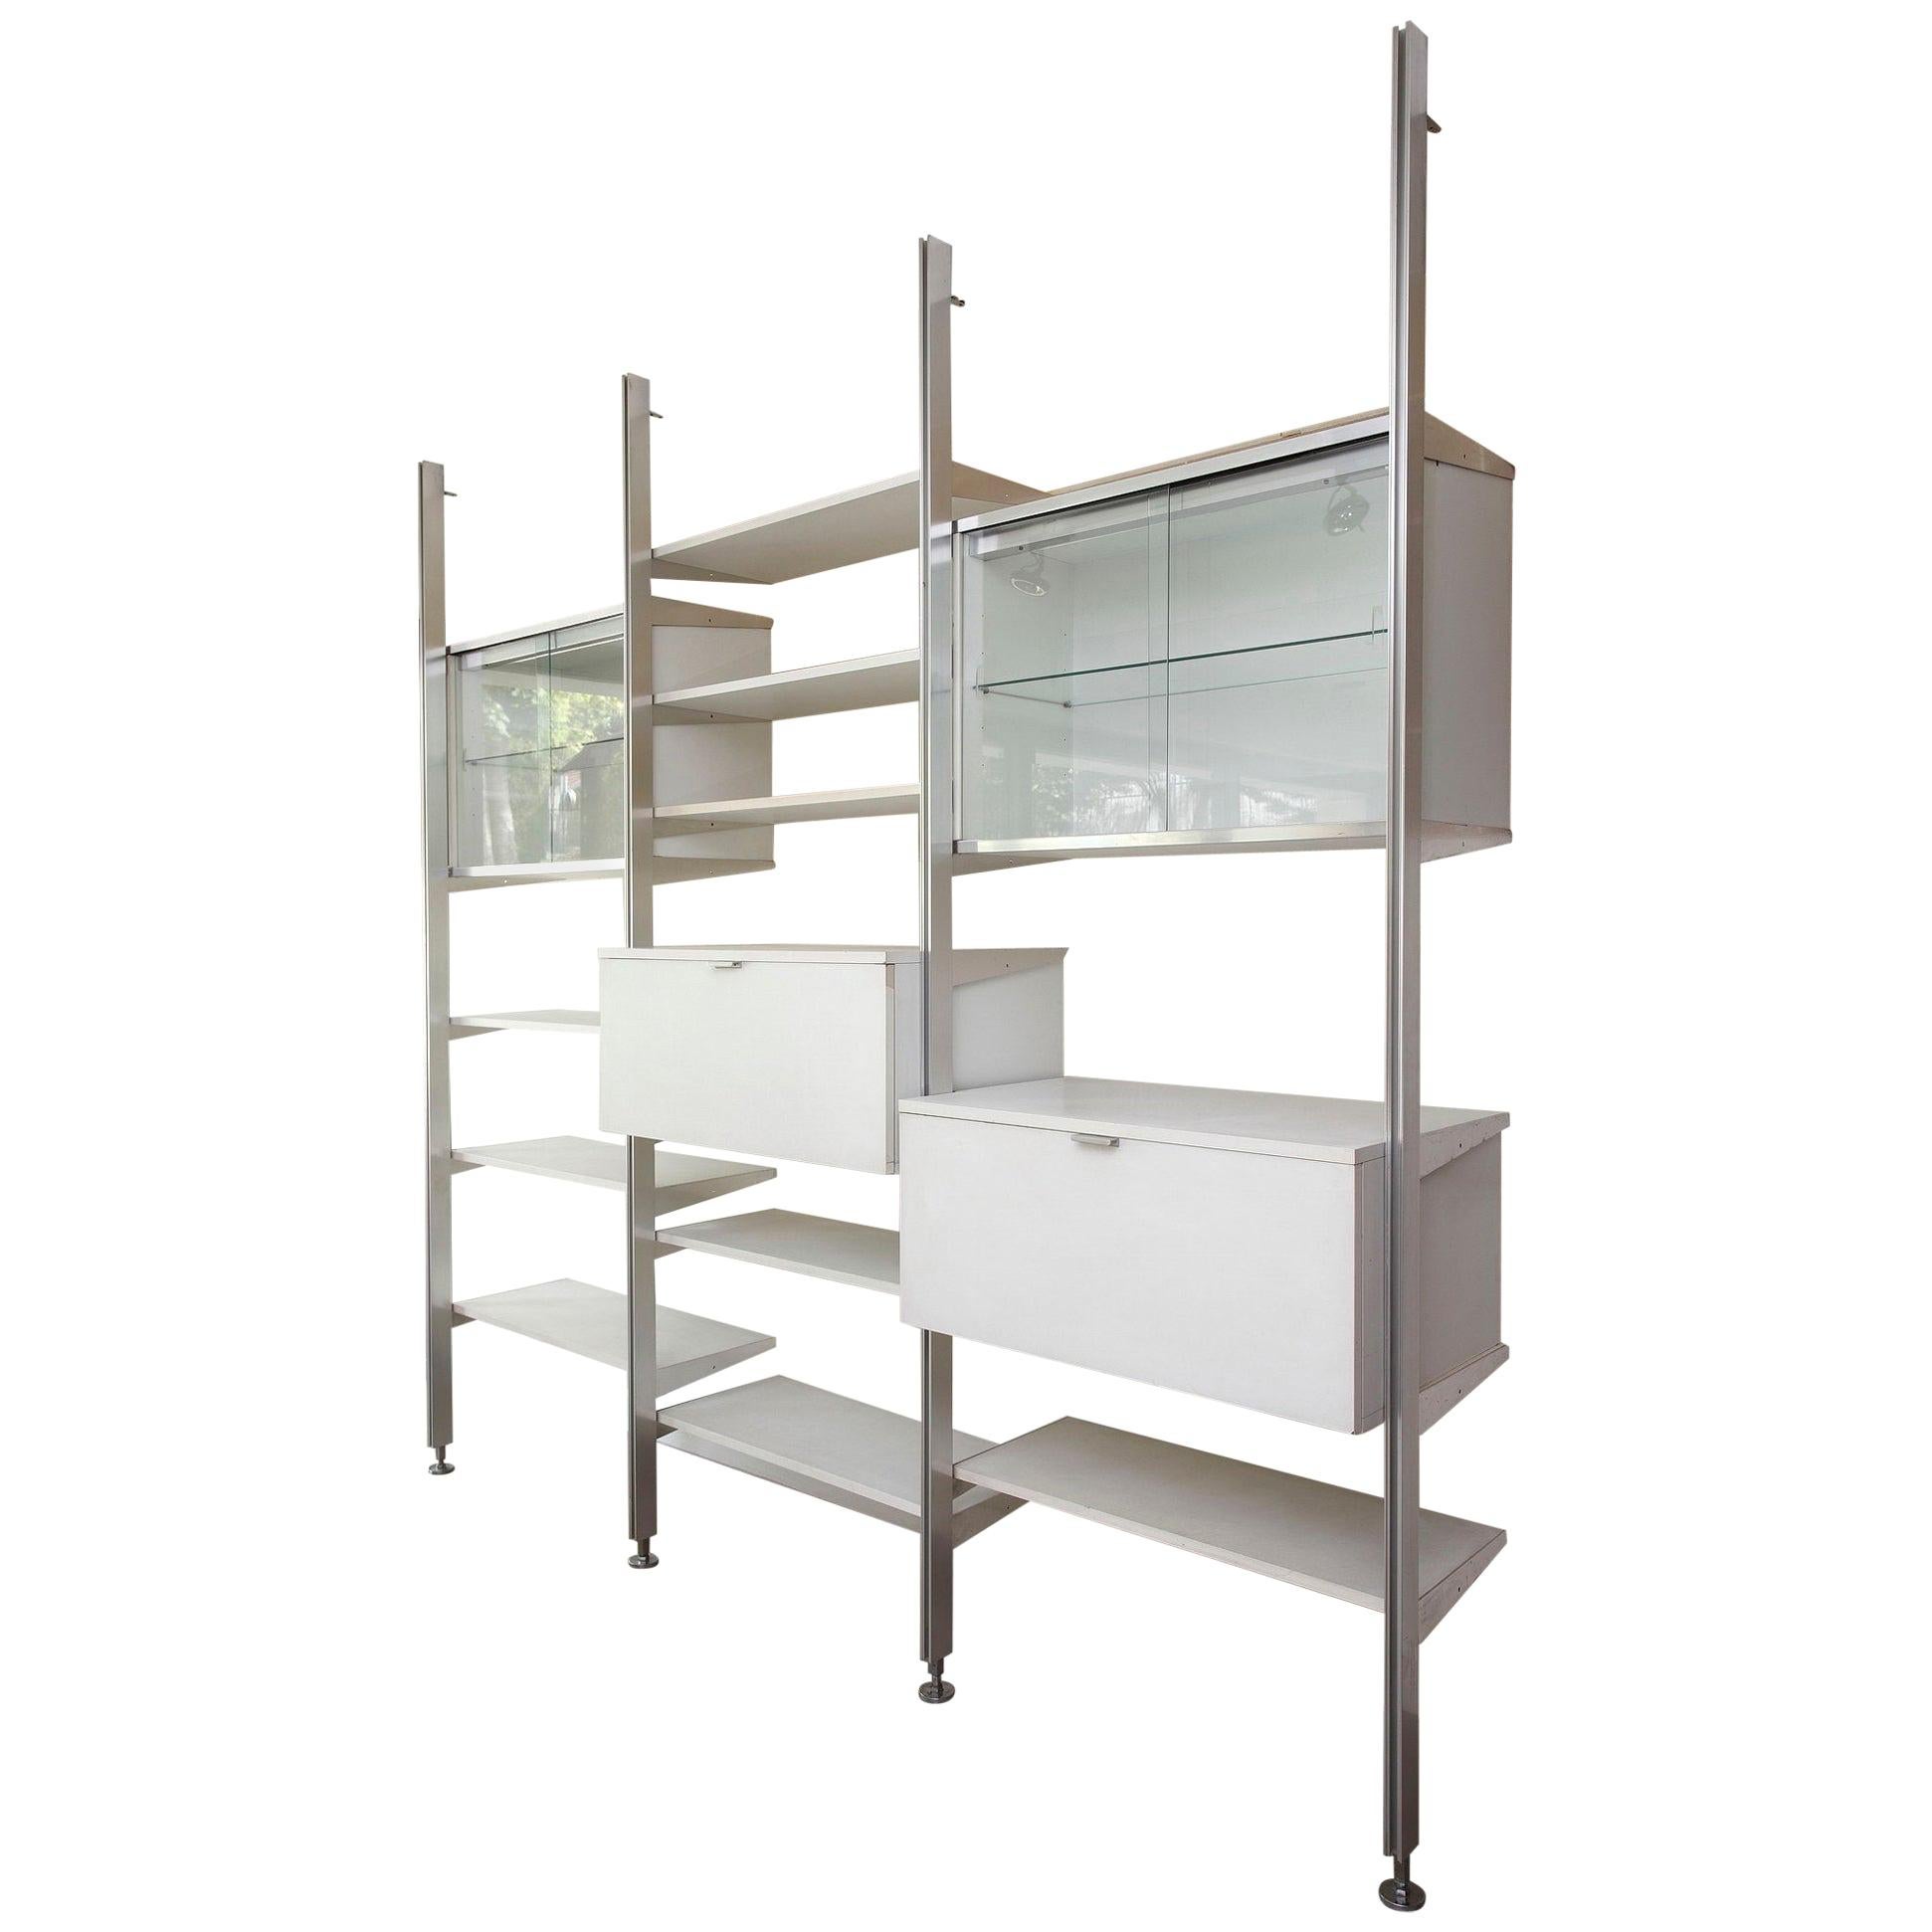 20th Century Modular Wall Unit in Mobilier International Style